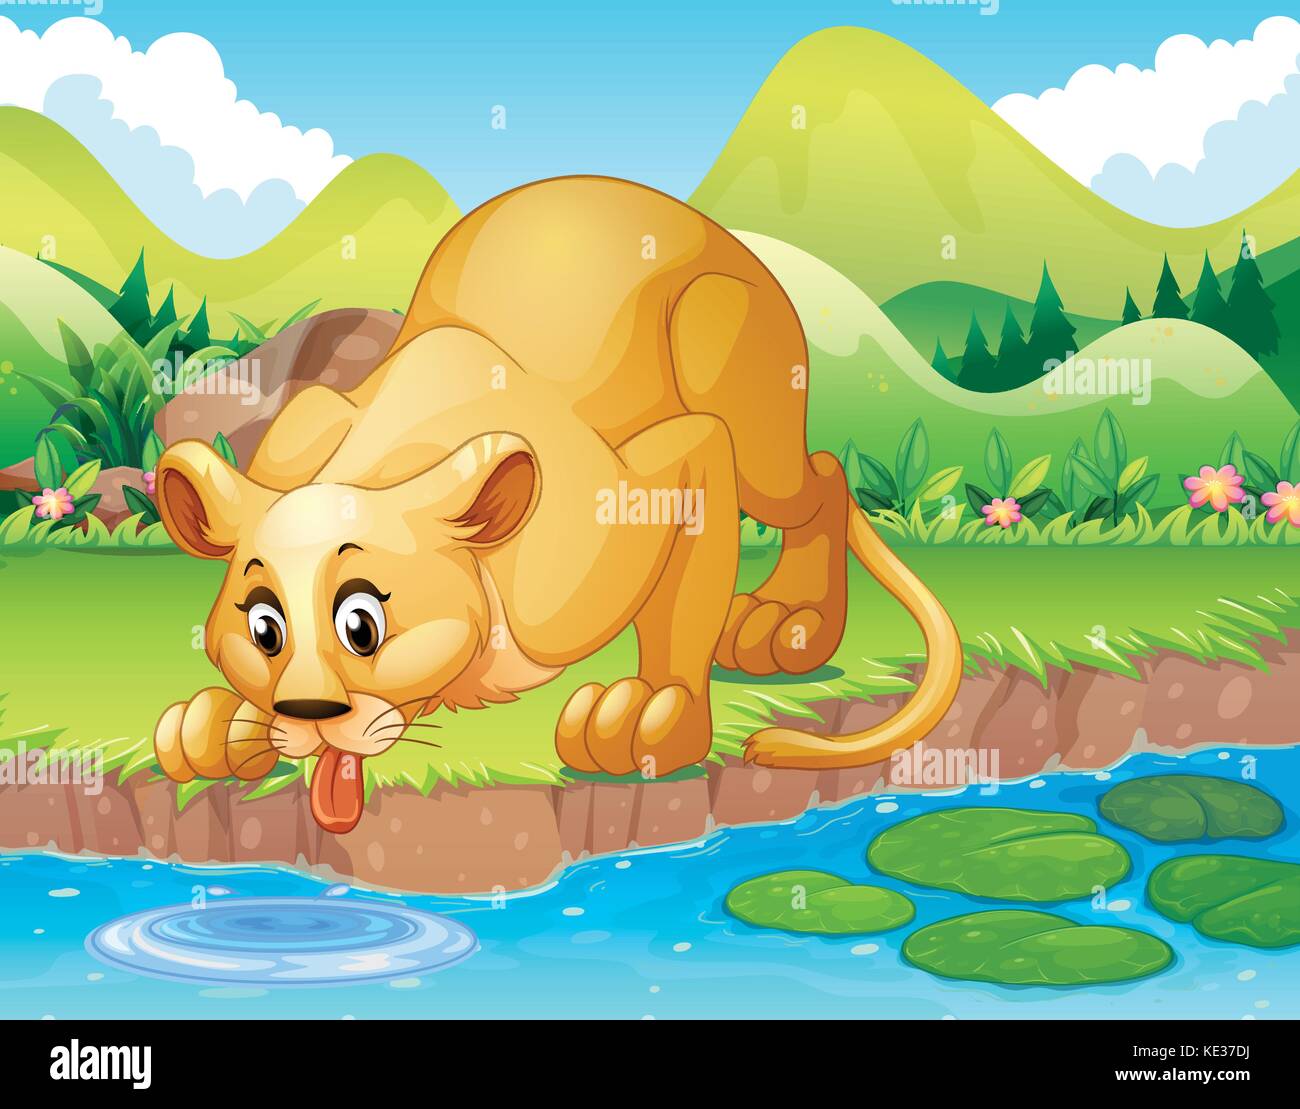 Lion drinking water Stock Vector Images - Alamy